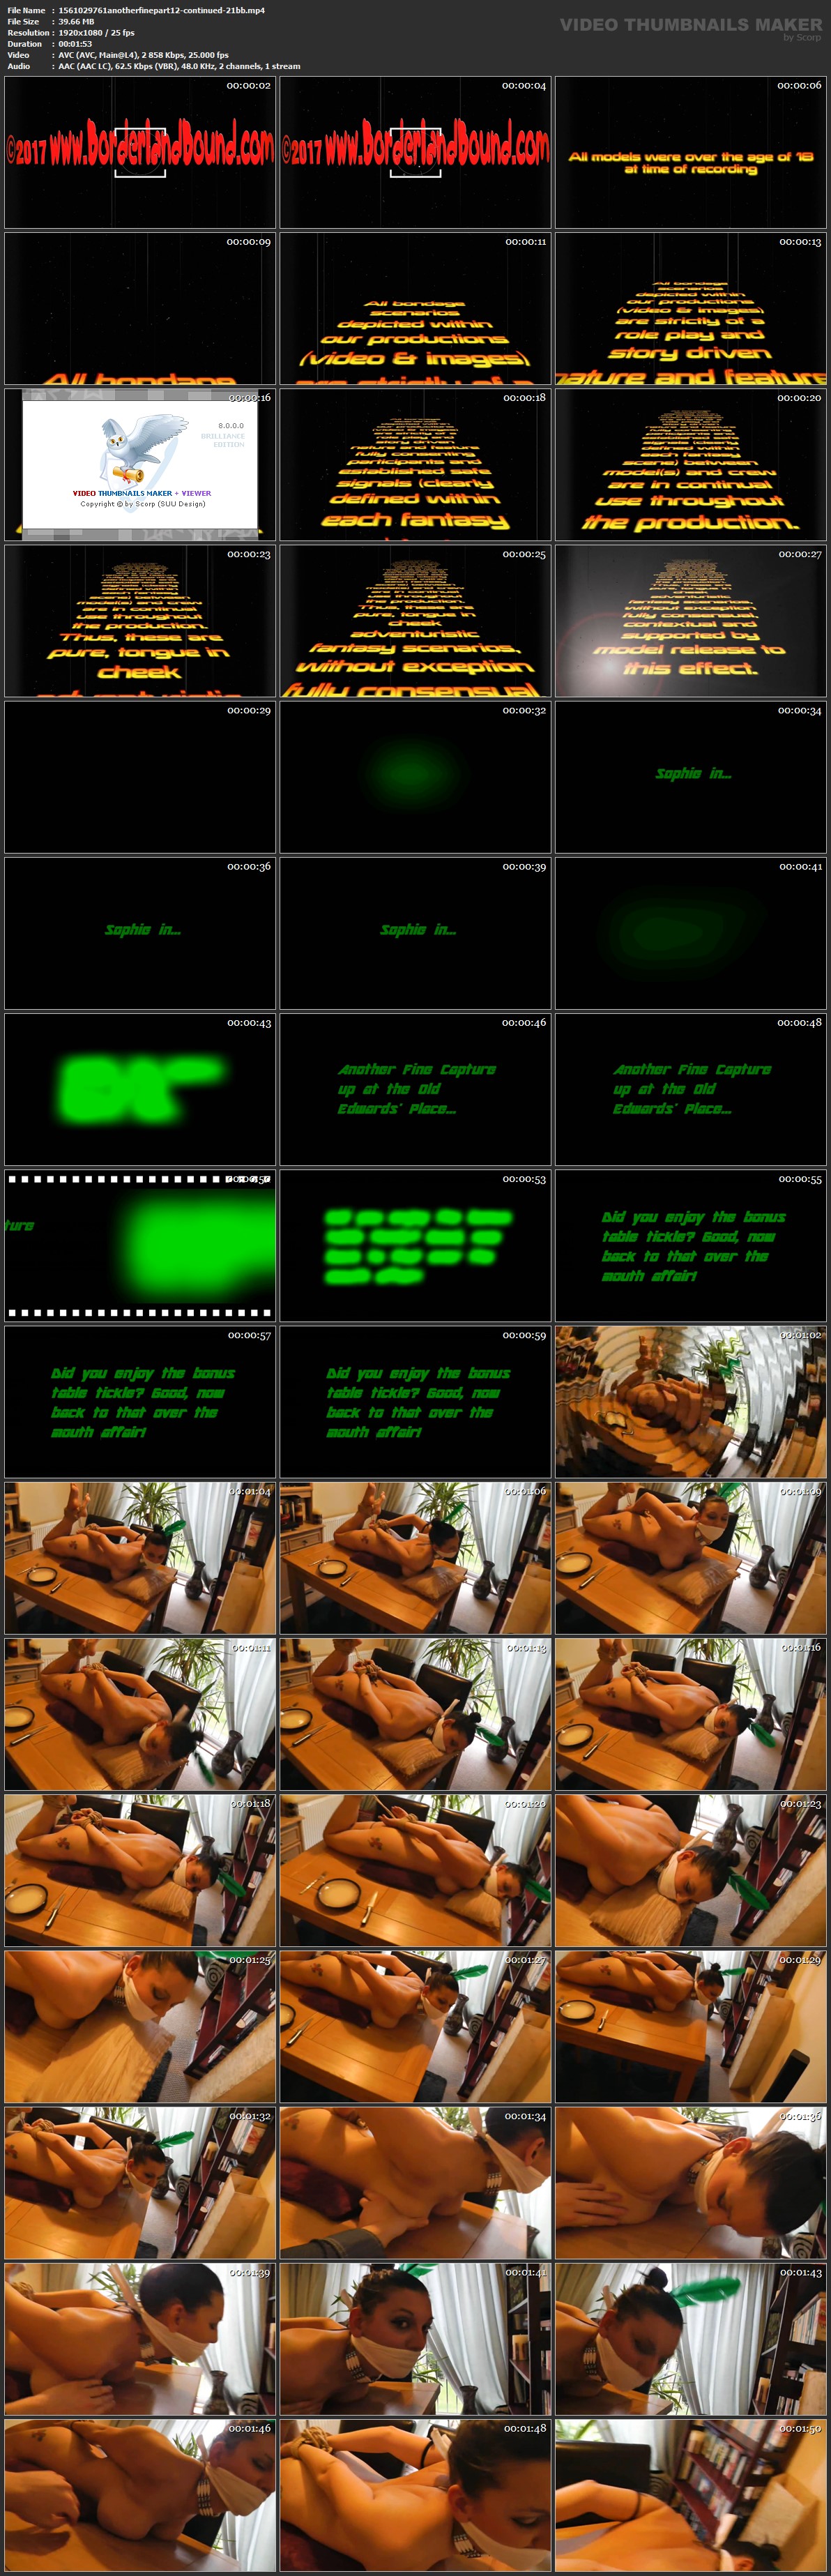 1561029761 anotherfinepart 12 continued 21 bb mp 4